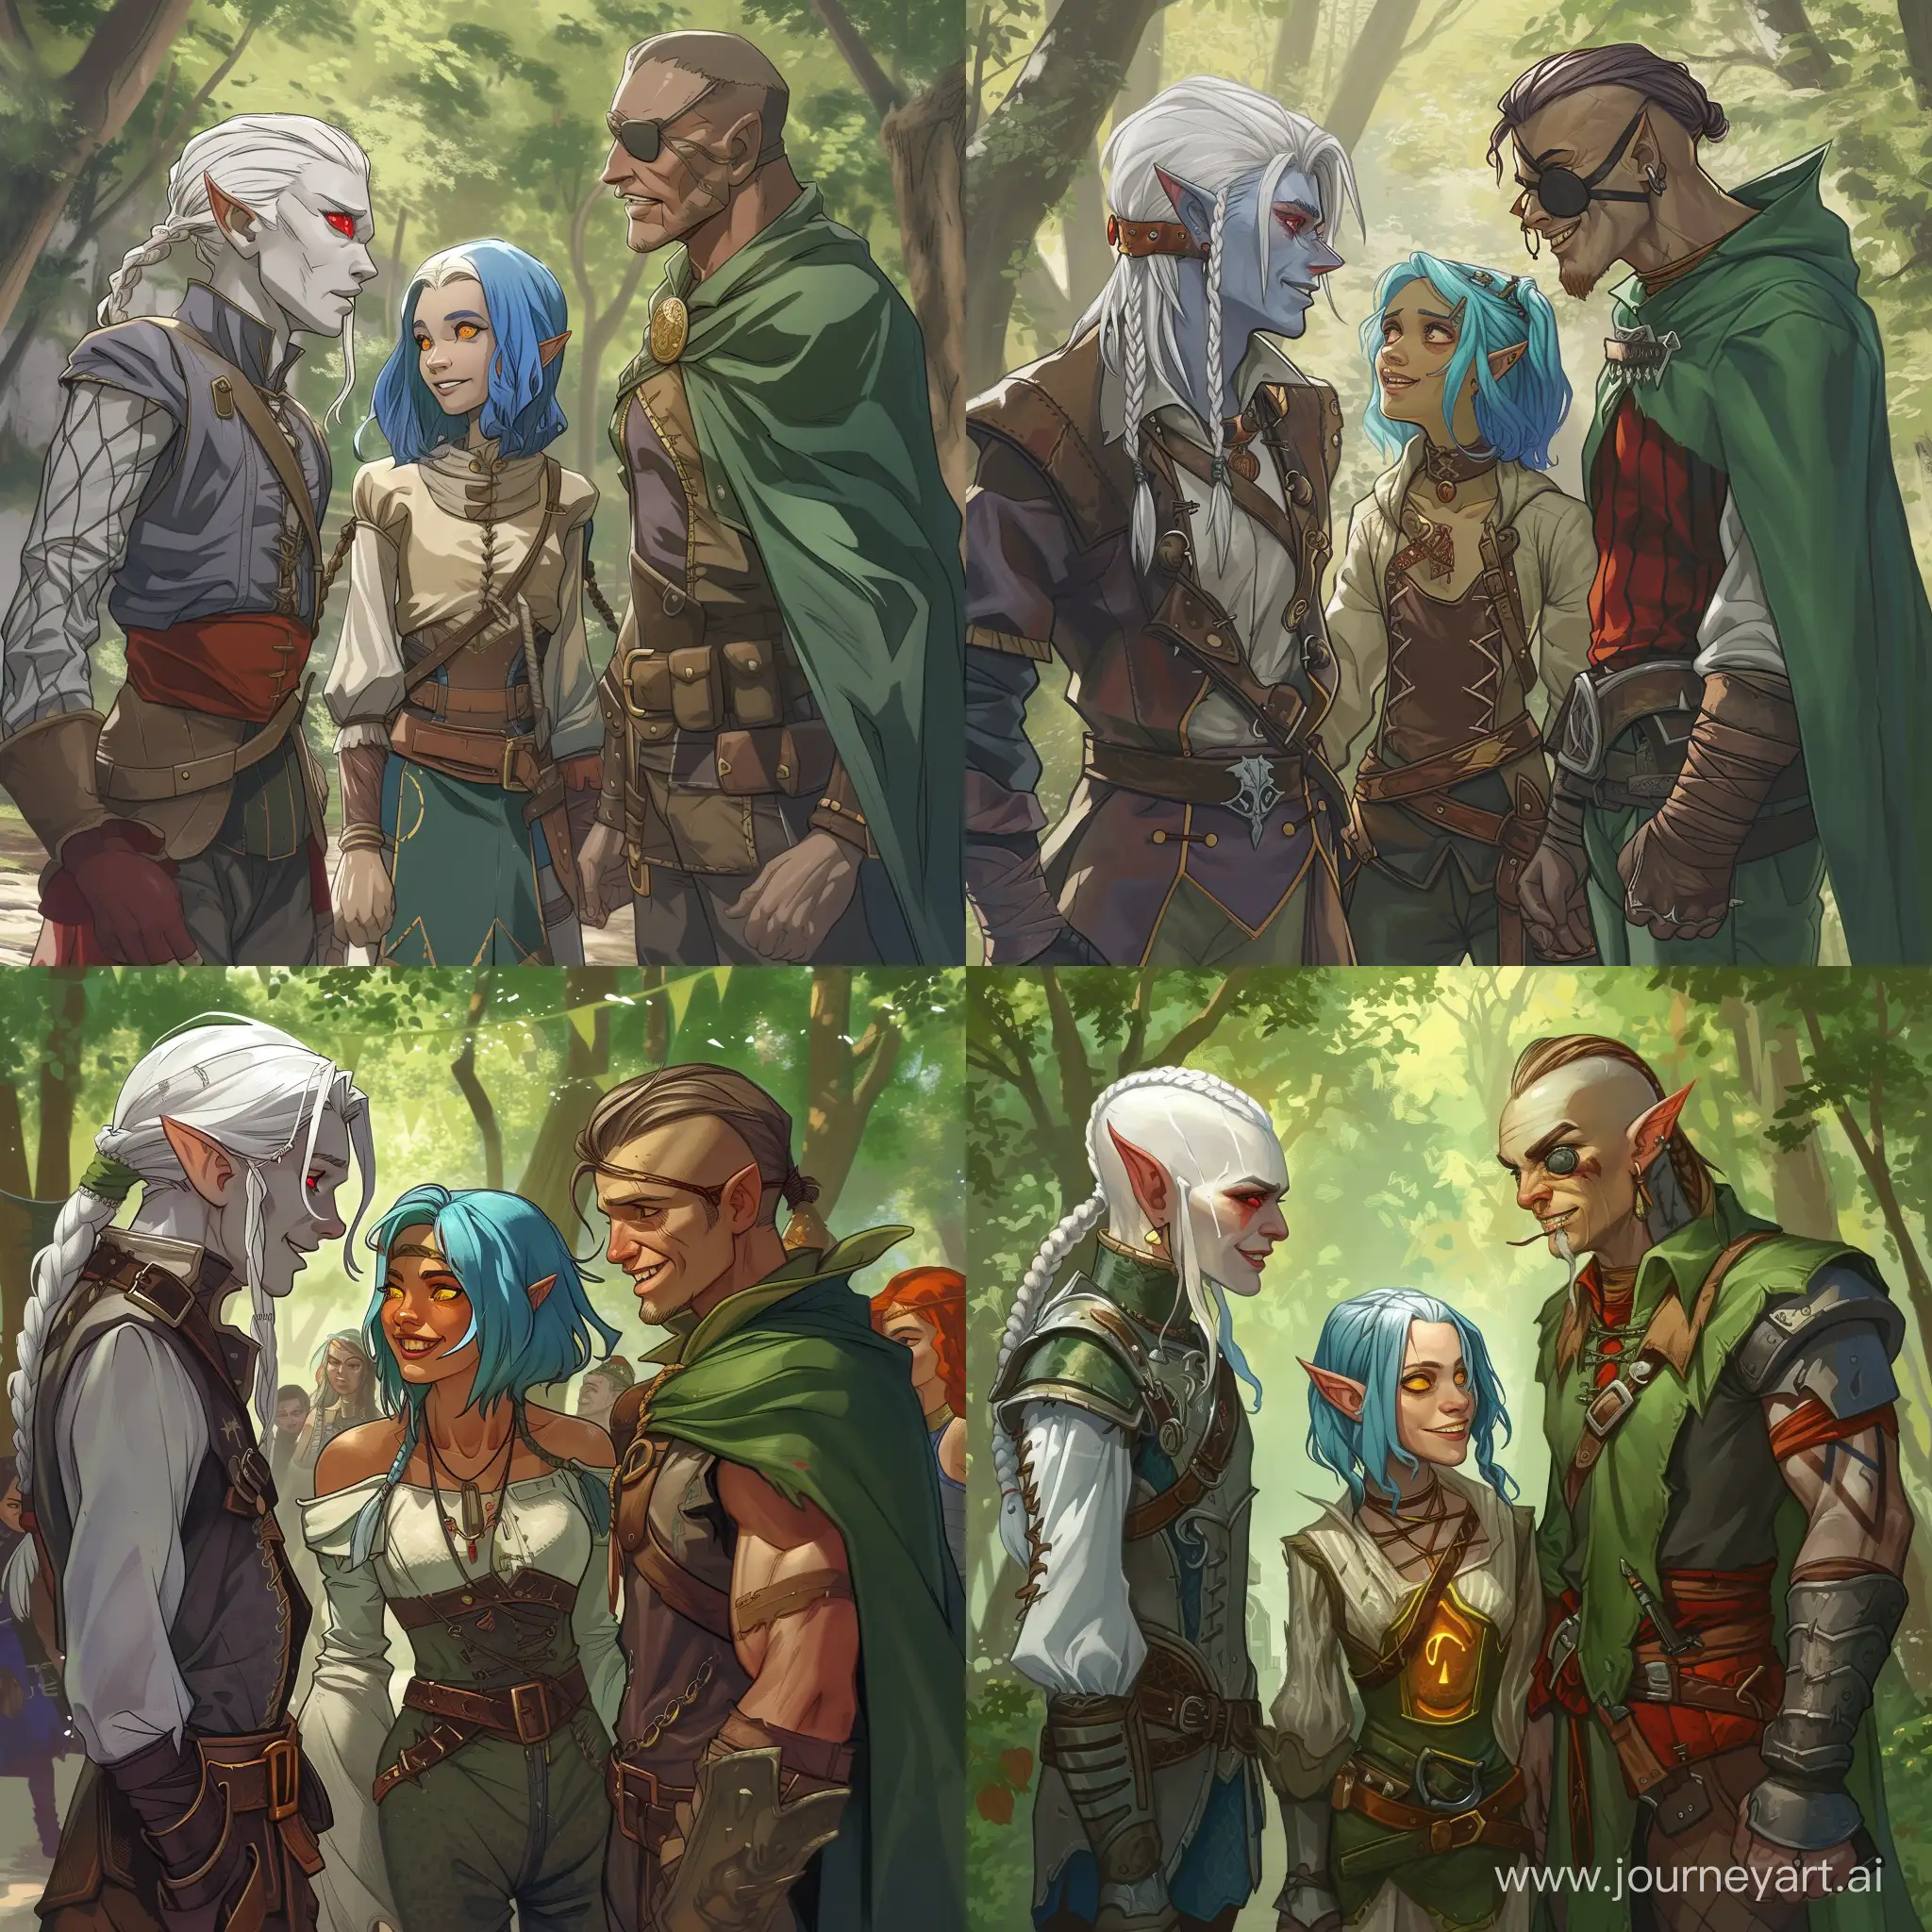 Draw a characters from the Dungeons and Dragons universe according to the following description: Three people stand and look at each other, sideways to the viewer. Thin drow man with slicked white hair in braid, with red eyes and grey skin, dressed in swashbuckler clothes: half-elf girl with shoulder-lenght blue hair, yellow eyes, dressed in light leather armor with a green cloak; and human barbarian, whos tall, muscular, with an eye patch, green eyes, bald with brown forelock. People chatting and laughing. Behind is a forest clearing